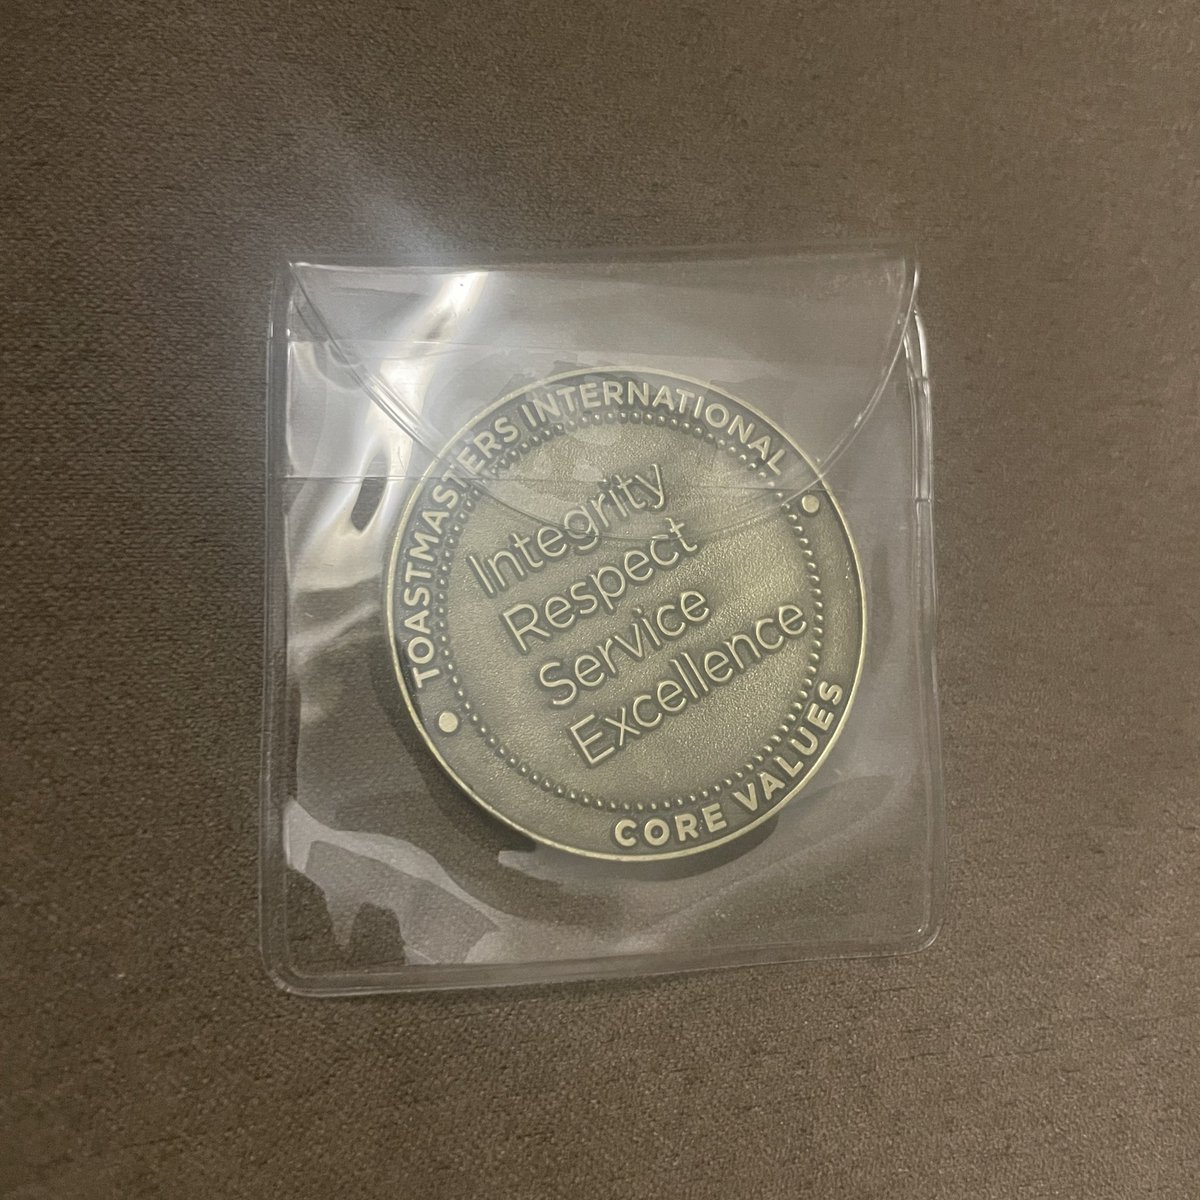 Received my @Toastmasters coin this week as part of The Founder’s District Bring It Home Award! I don’t know or remember what that means exactly. 😂 It’s nice to get recognized though. Thank you!